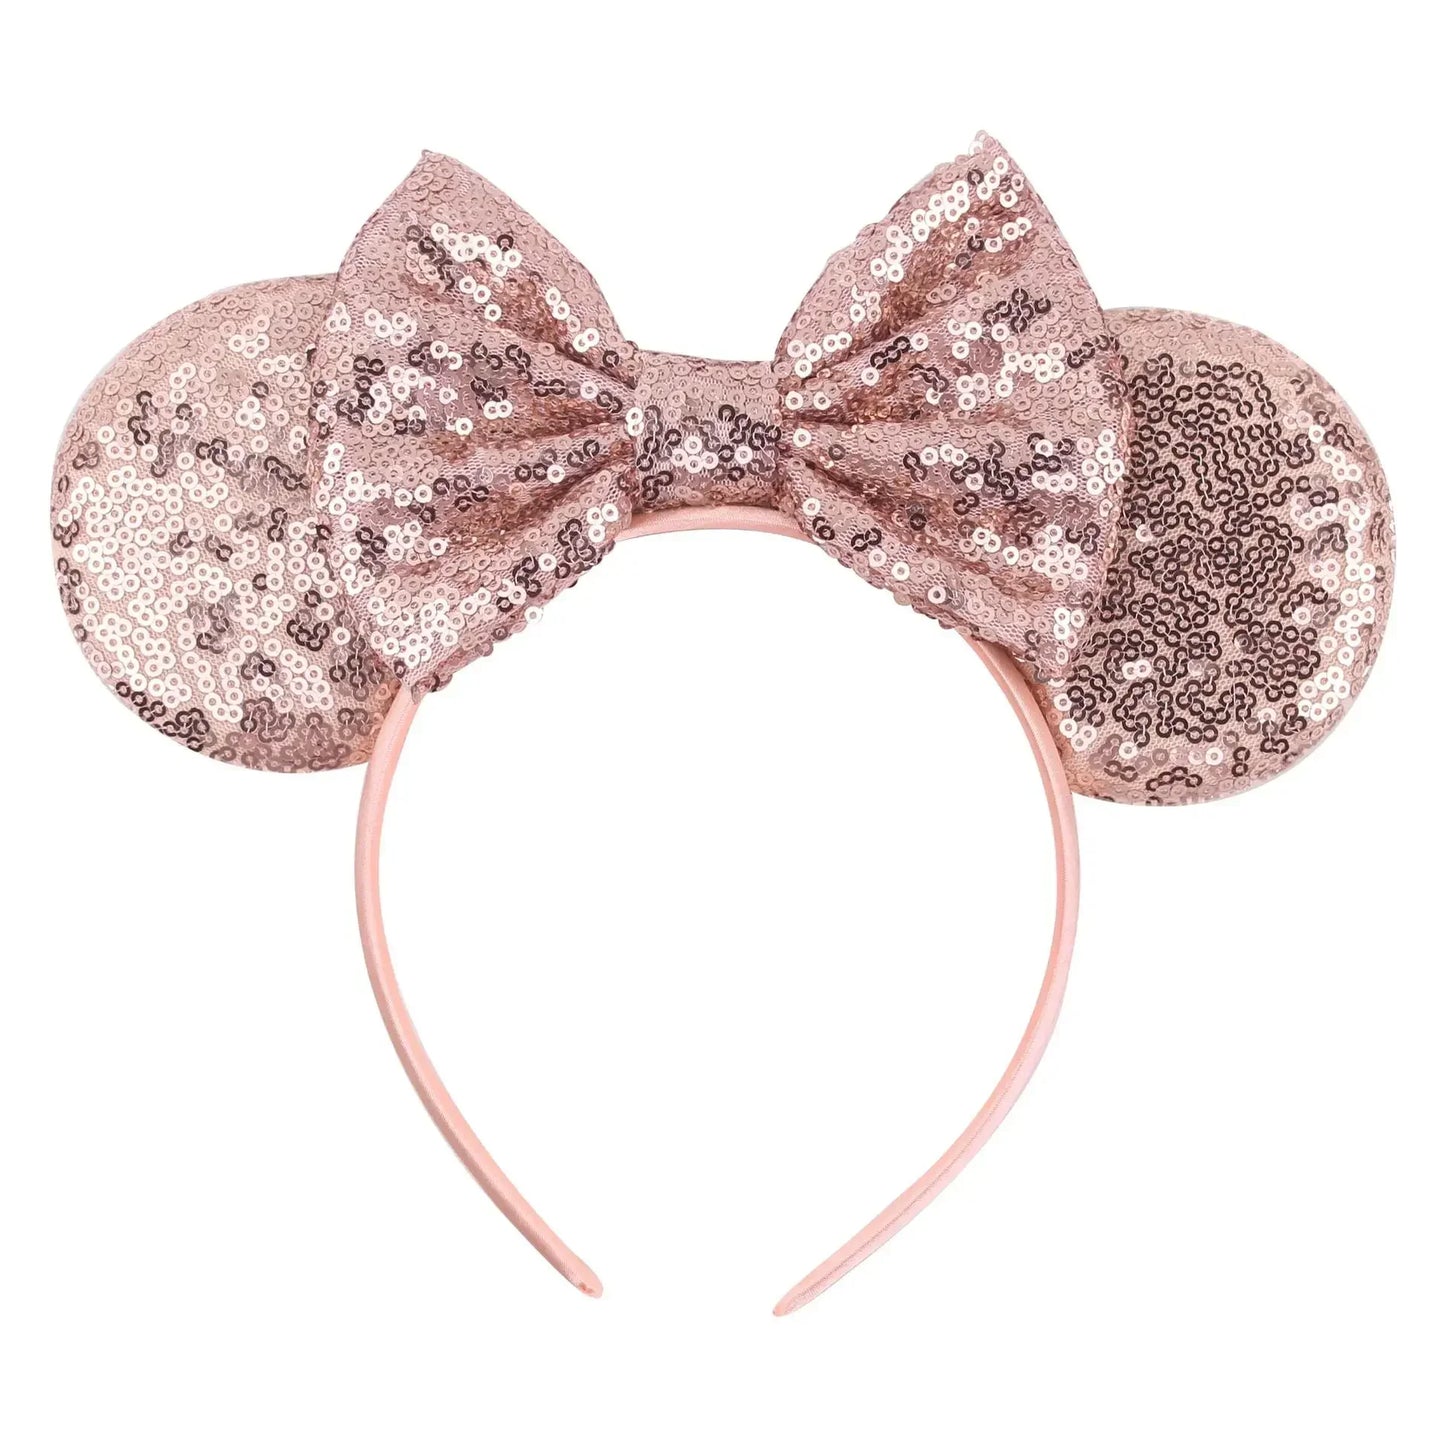 Disney Mickey Mouse Ears Animal Prints And More Ears For Adults Headband Hair Accessory